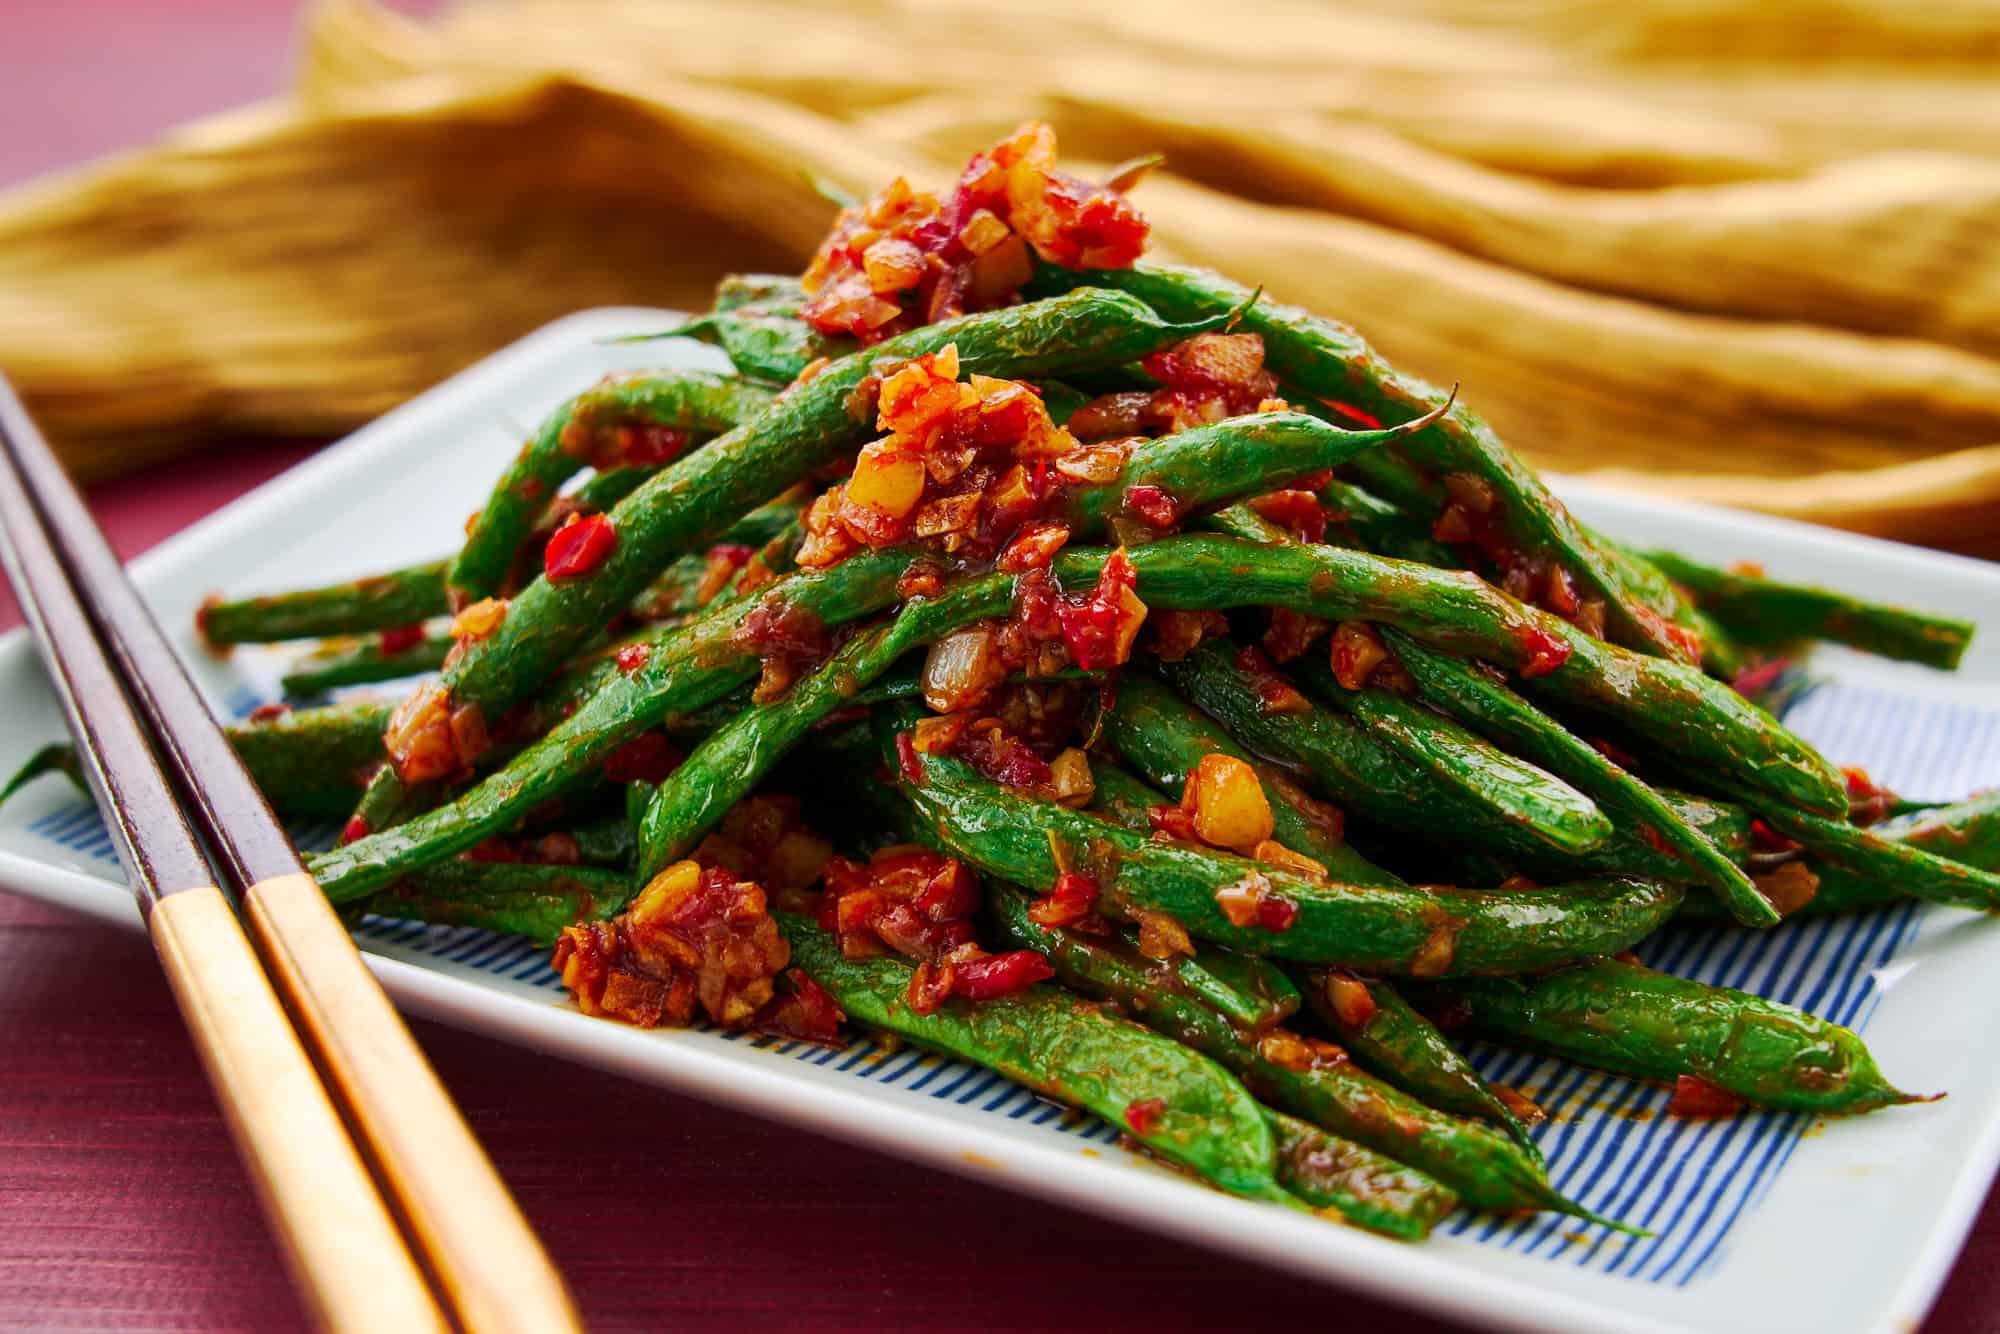 Mound of green beans stir fried with garlic and chili paste. An easy vegan Chiense stir-fry.